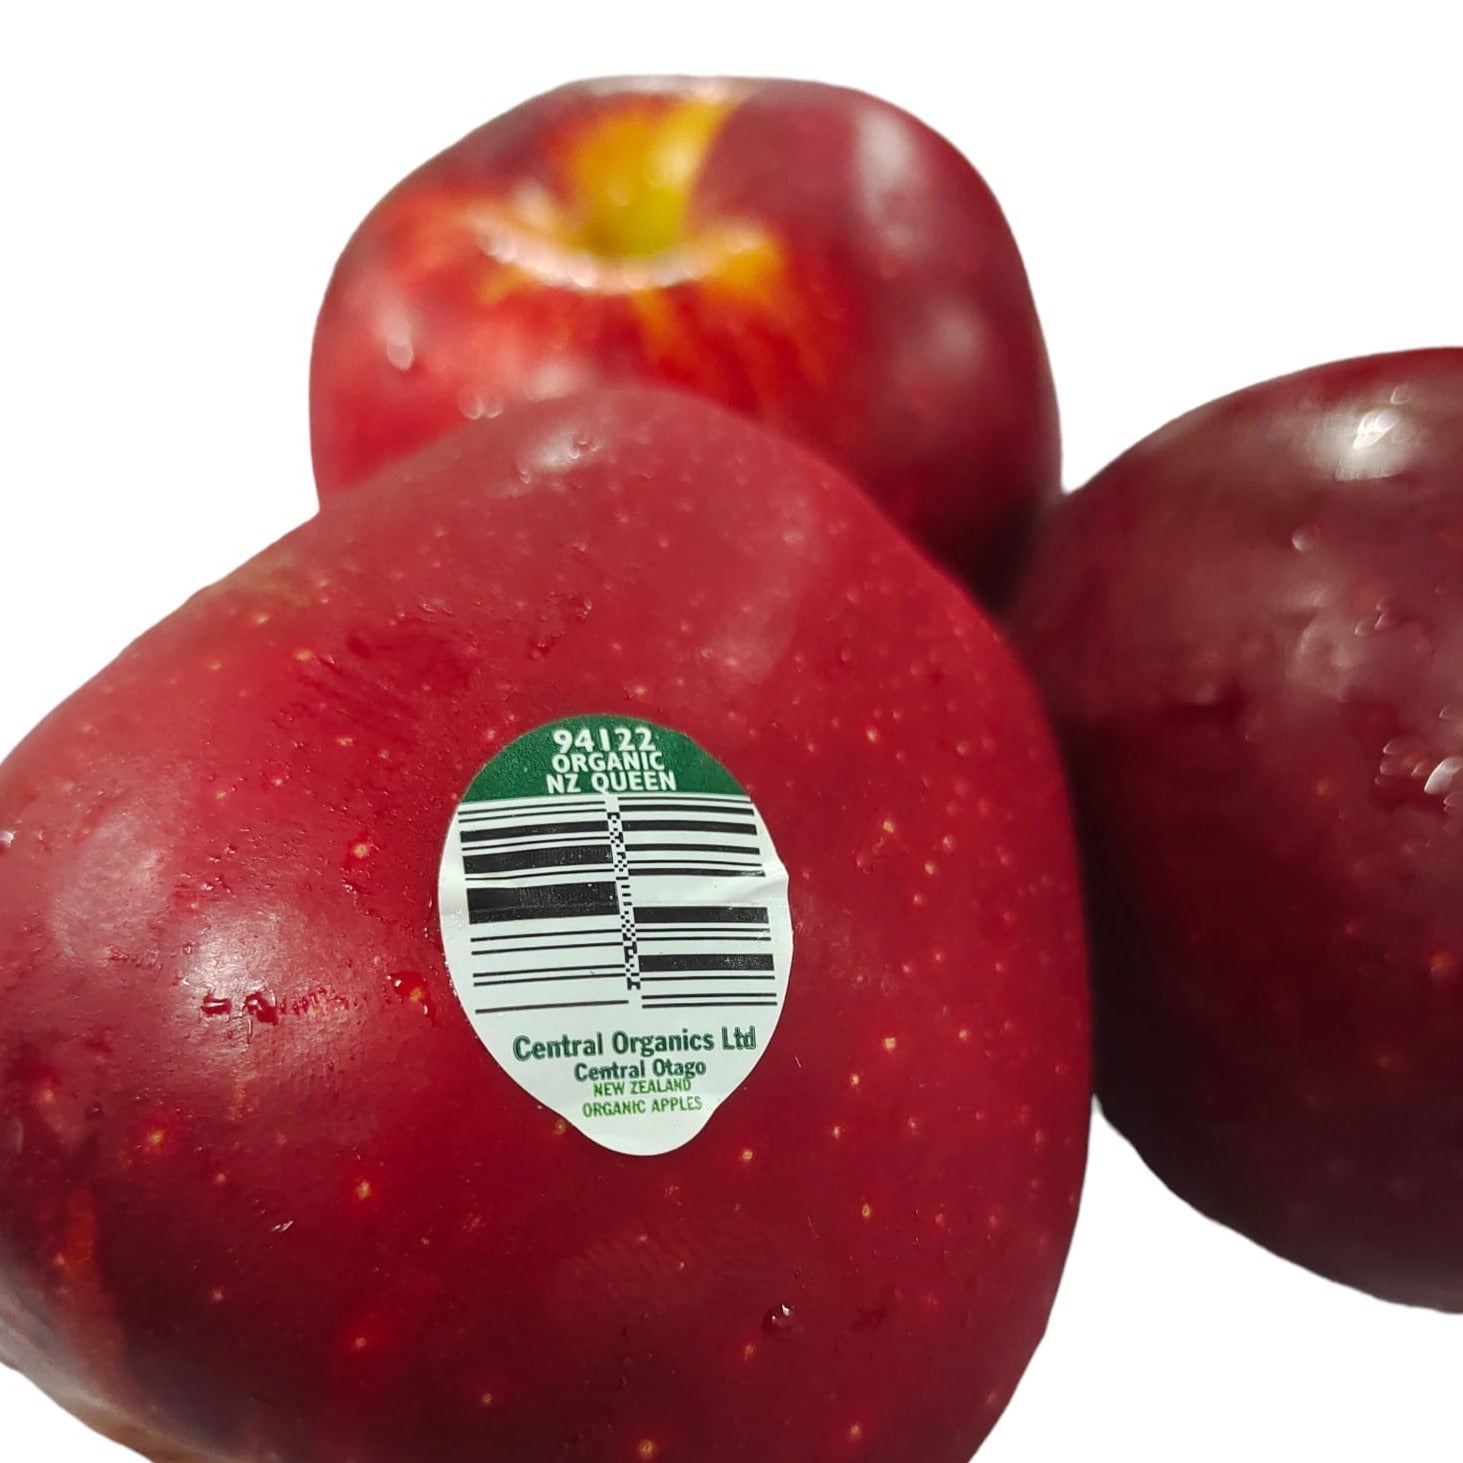 Buy NZ Red Delicious Apples Online